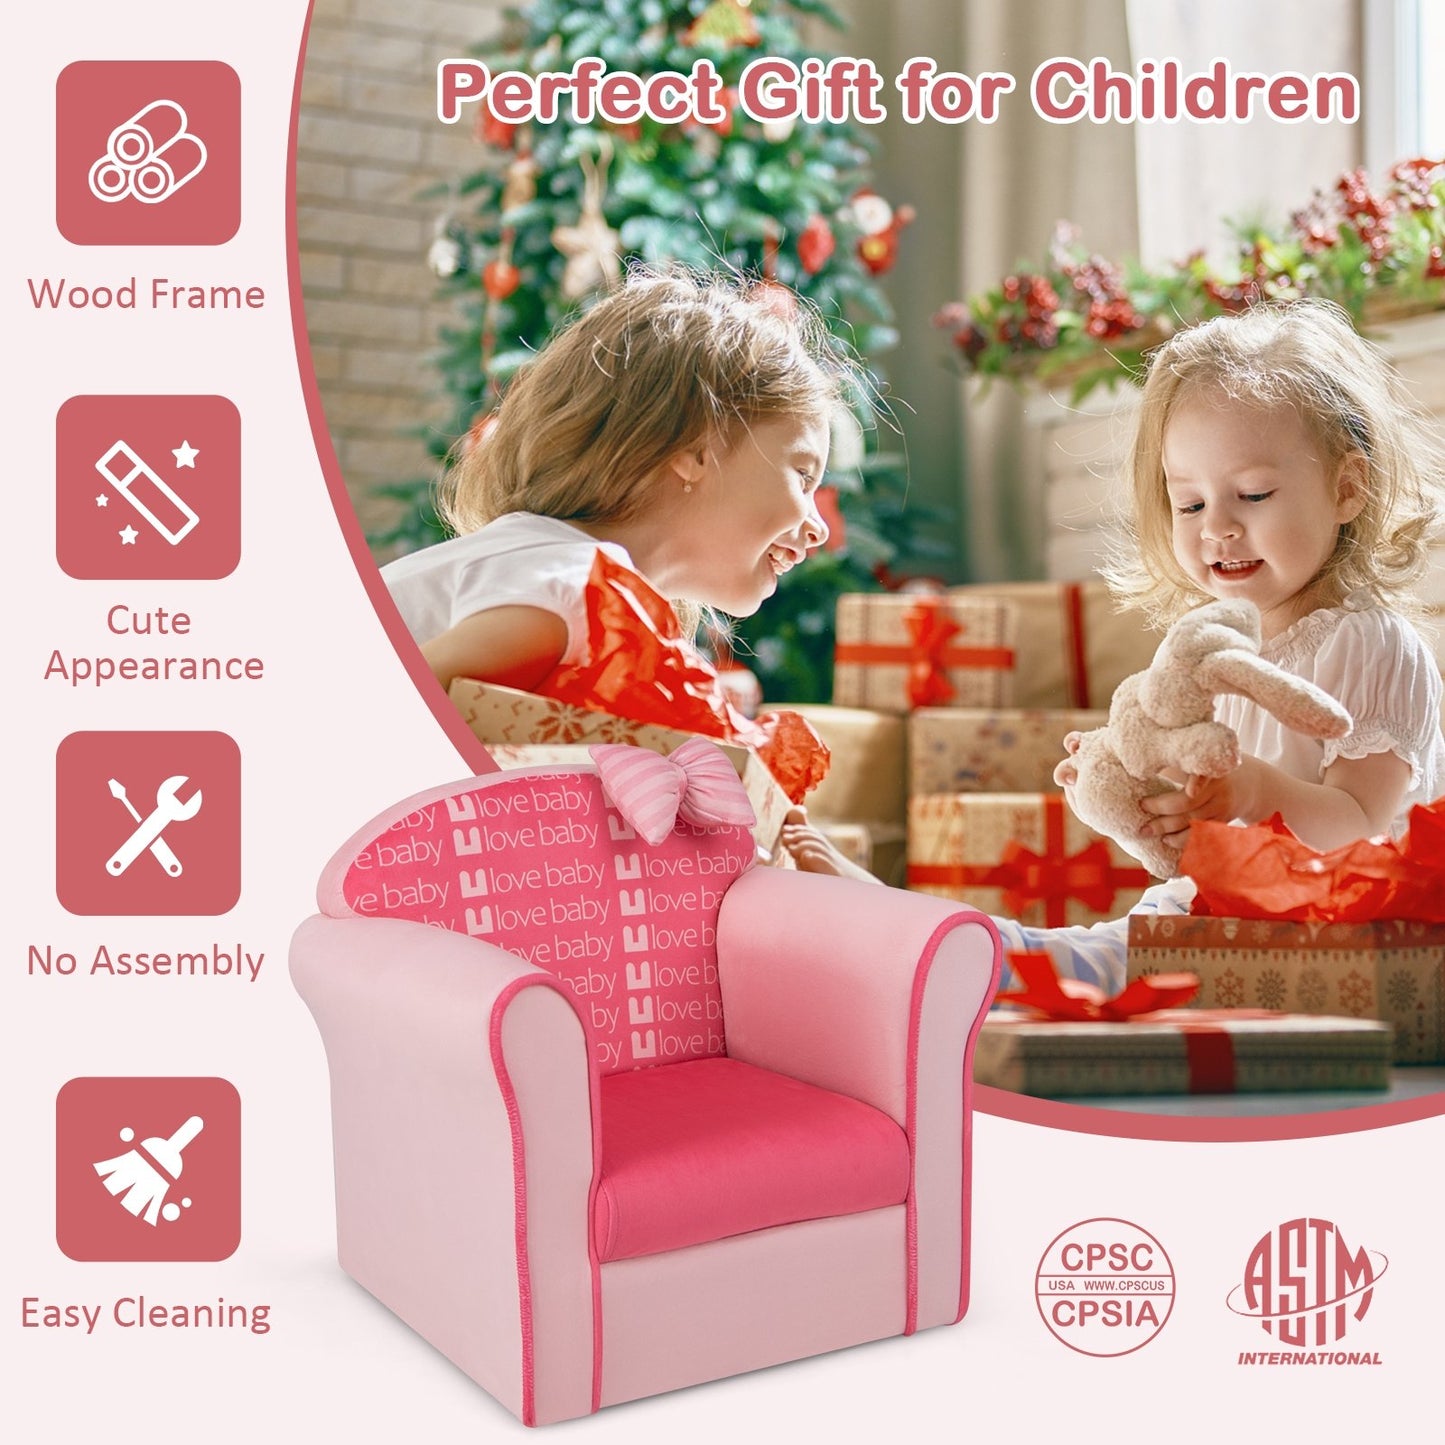 Original Kids Sofa with Armrest and Thick Cushion, Pink